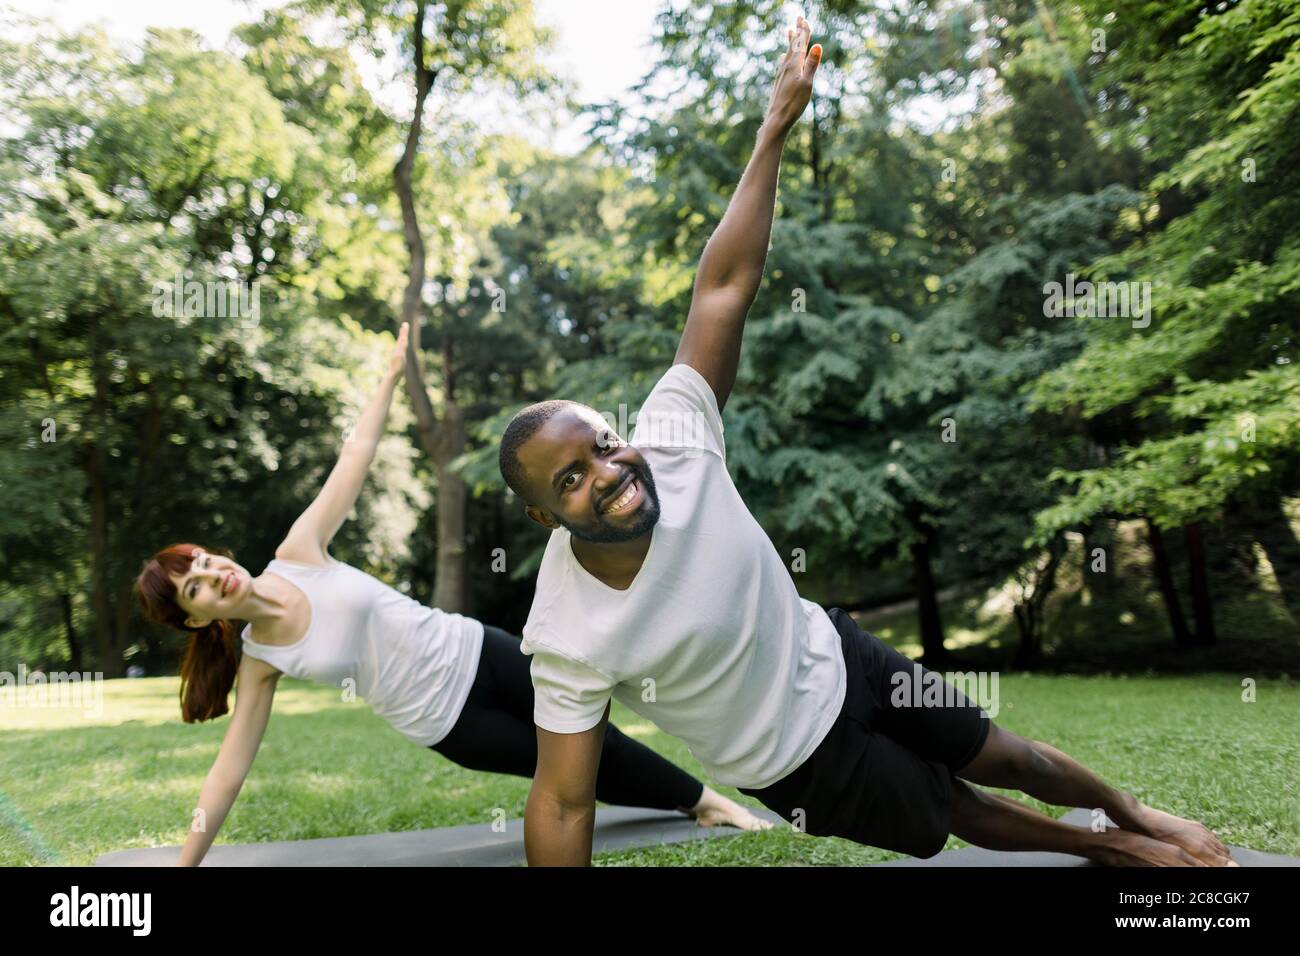 Multiethnic joyful young man and woman exercising in a park, holding side-plank position with one arm raised up. Fit couple training outdoors in the Stock Photo